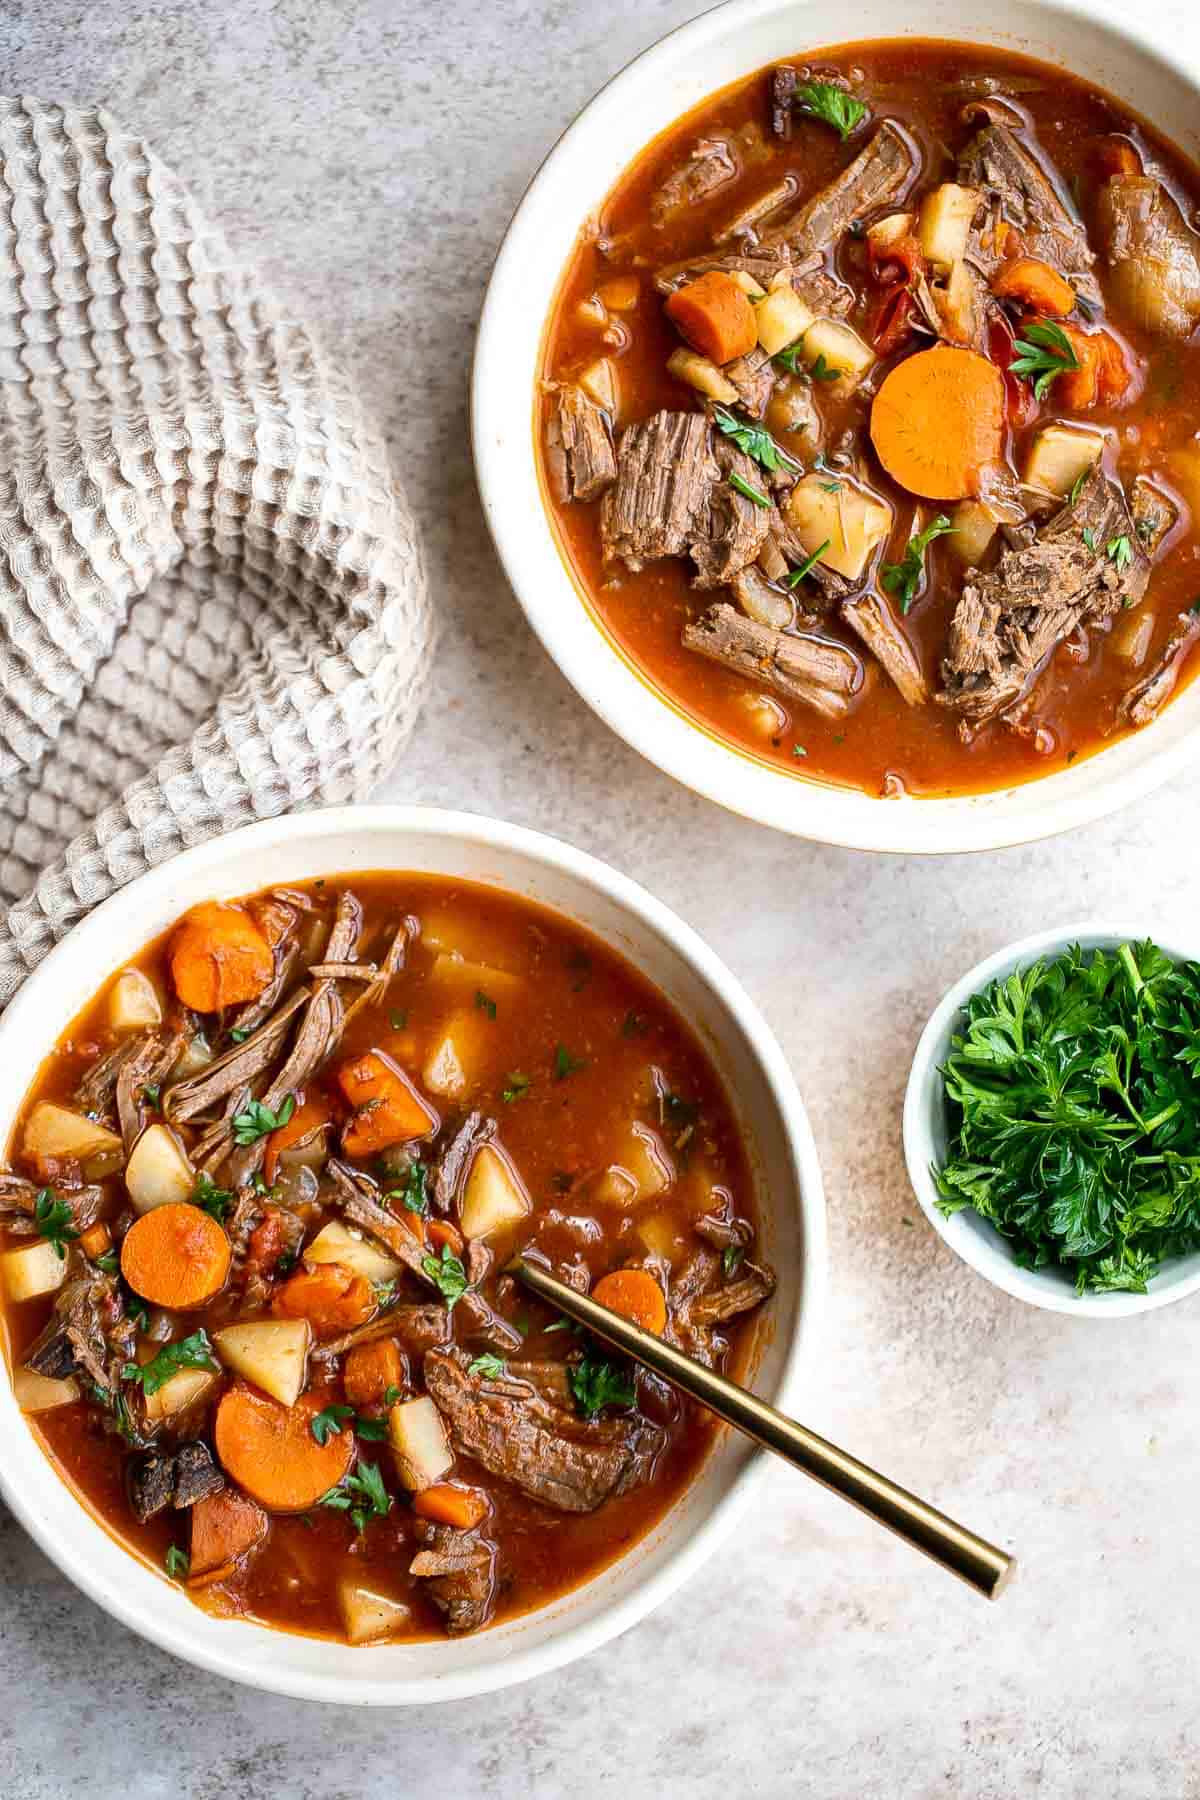 This easy Pot Roast Soup is made in 30 minutes with leftover beef and veggies simmered in broth. It’s hearty, flavorful, and nourishing comfort food. | aheadofthyme.com